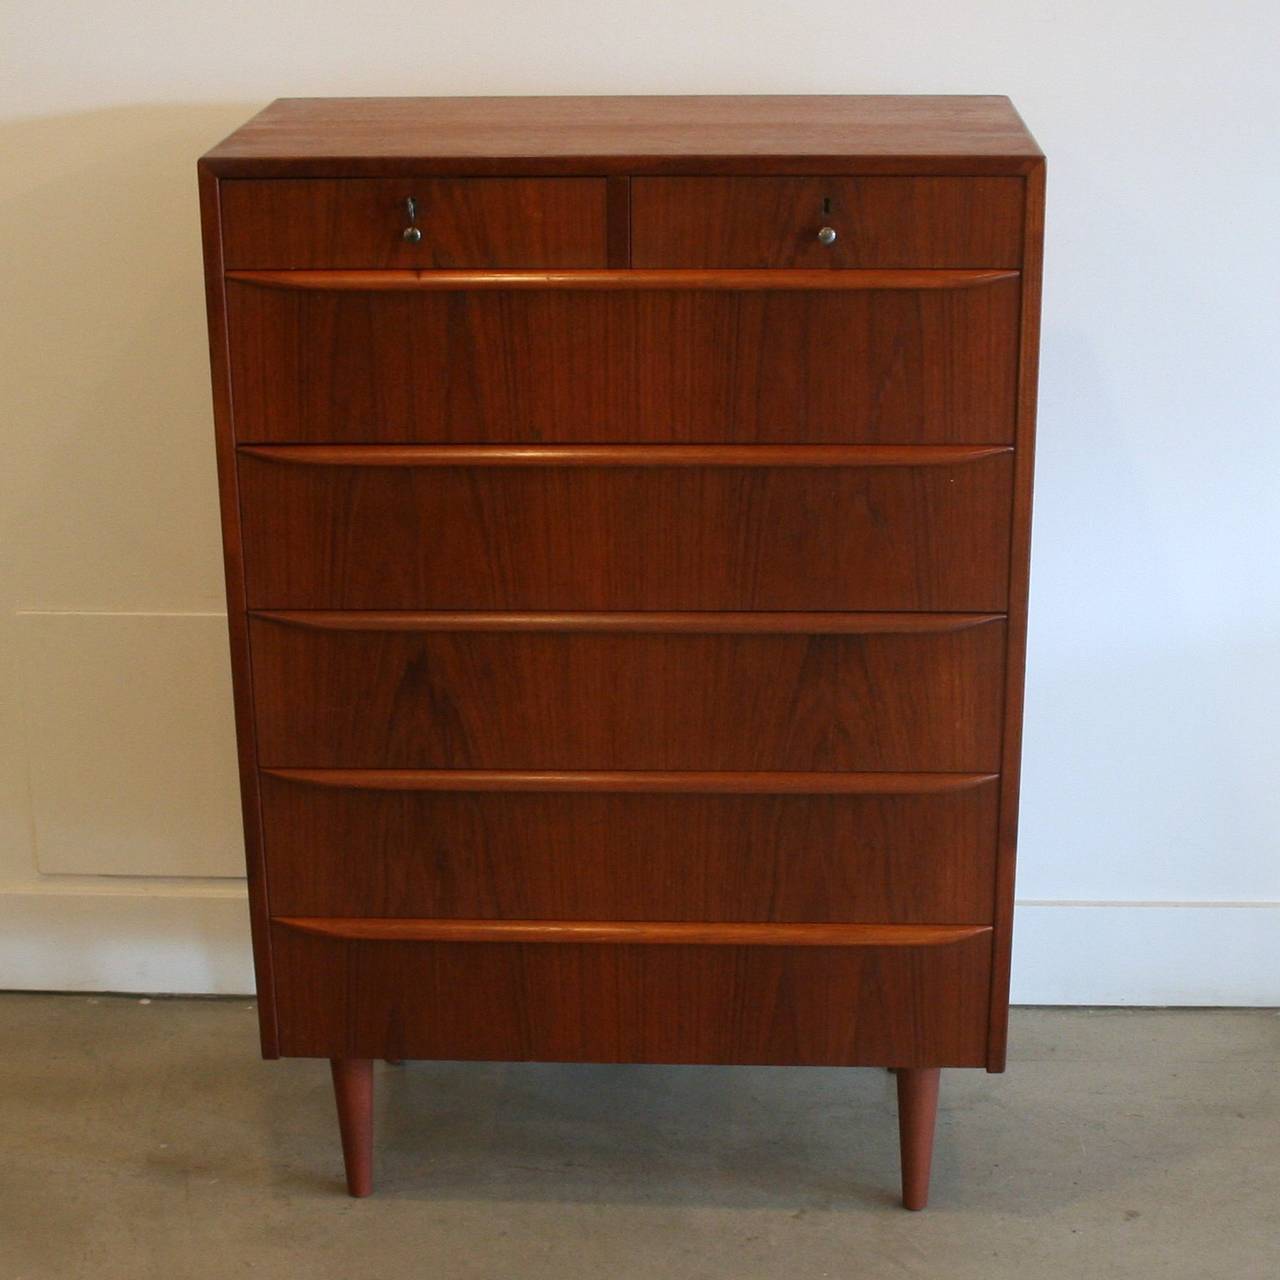 A vintage tallboy with two large small drawers on top of 5 larger bottom drawers. Featuring solid teak pulls and conical legs, dove-tailed drawers, and warm teak character.